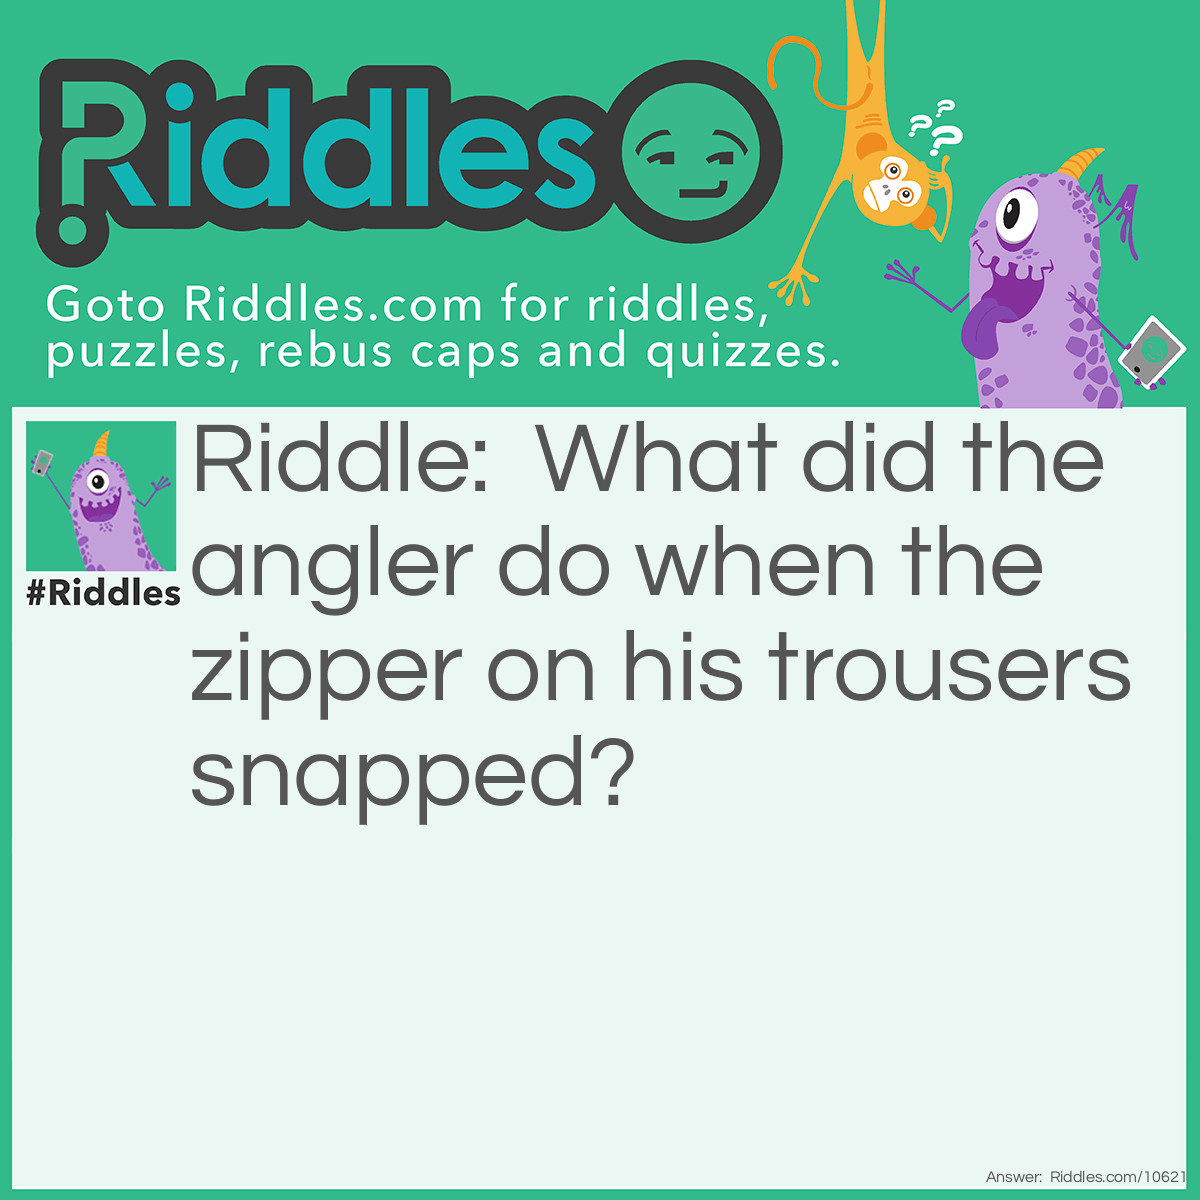 Riddle: What did the angler do when the zipper on his trousers snapped? Answer: He went fishing for some FLIES.